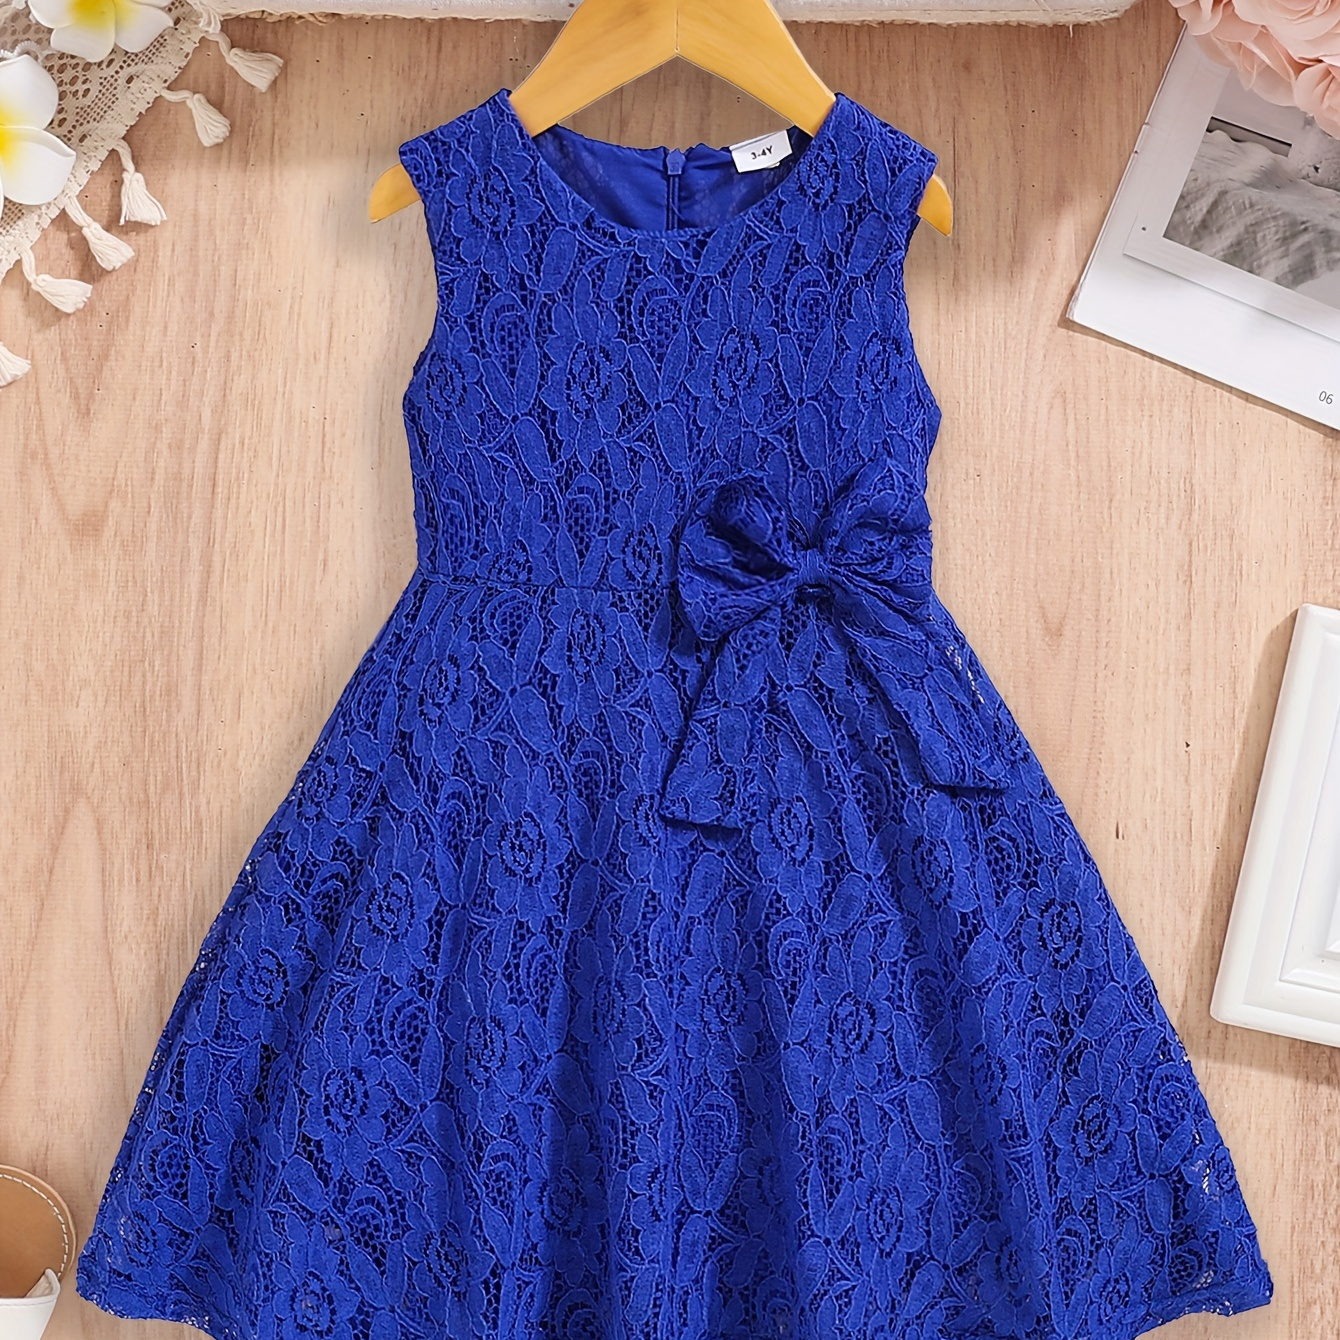 

Sleeveless Lace Dress For Girls, Gorgeous Style Bowknot Front Party Casual Dress For 3-10y